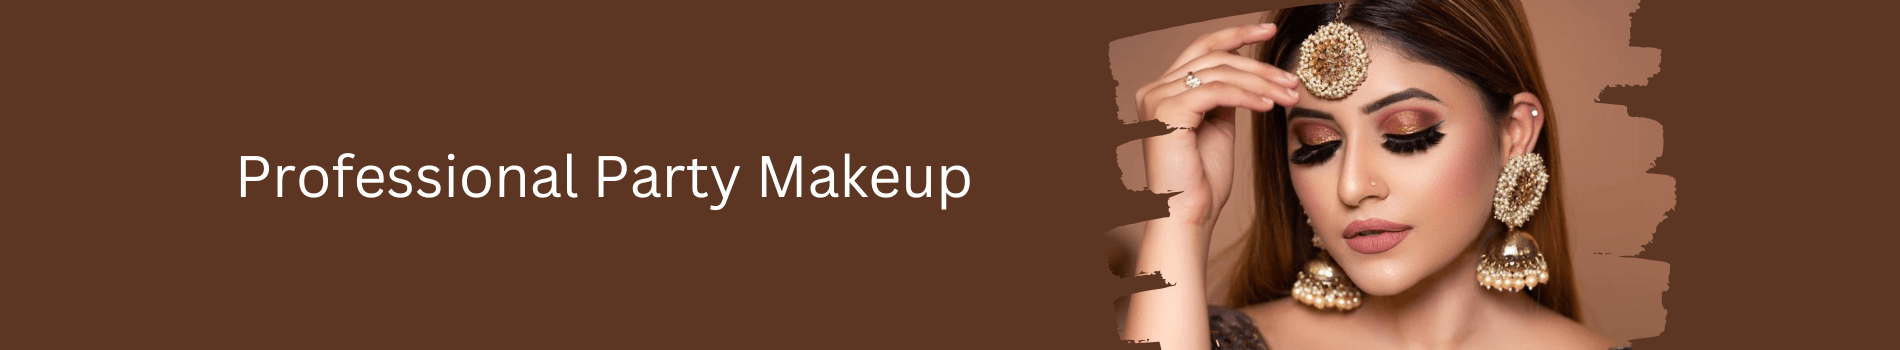 Party makeup services at home